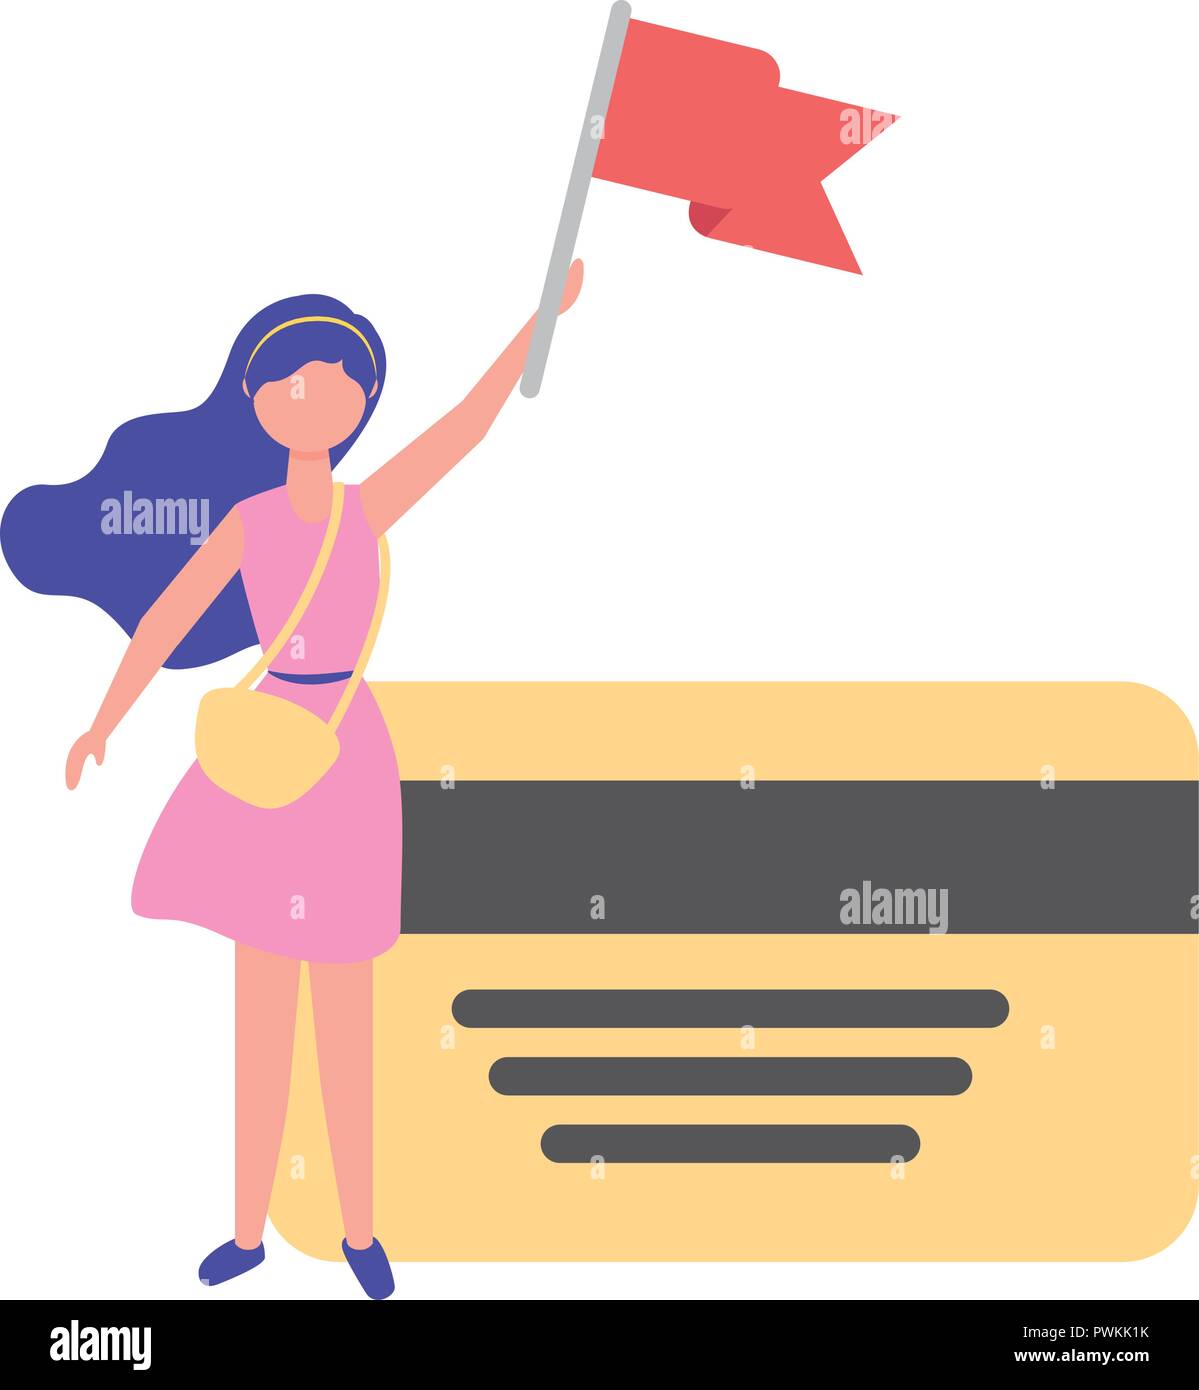 woman holding red flag and bank card business vector illustration Stock Vector